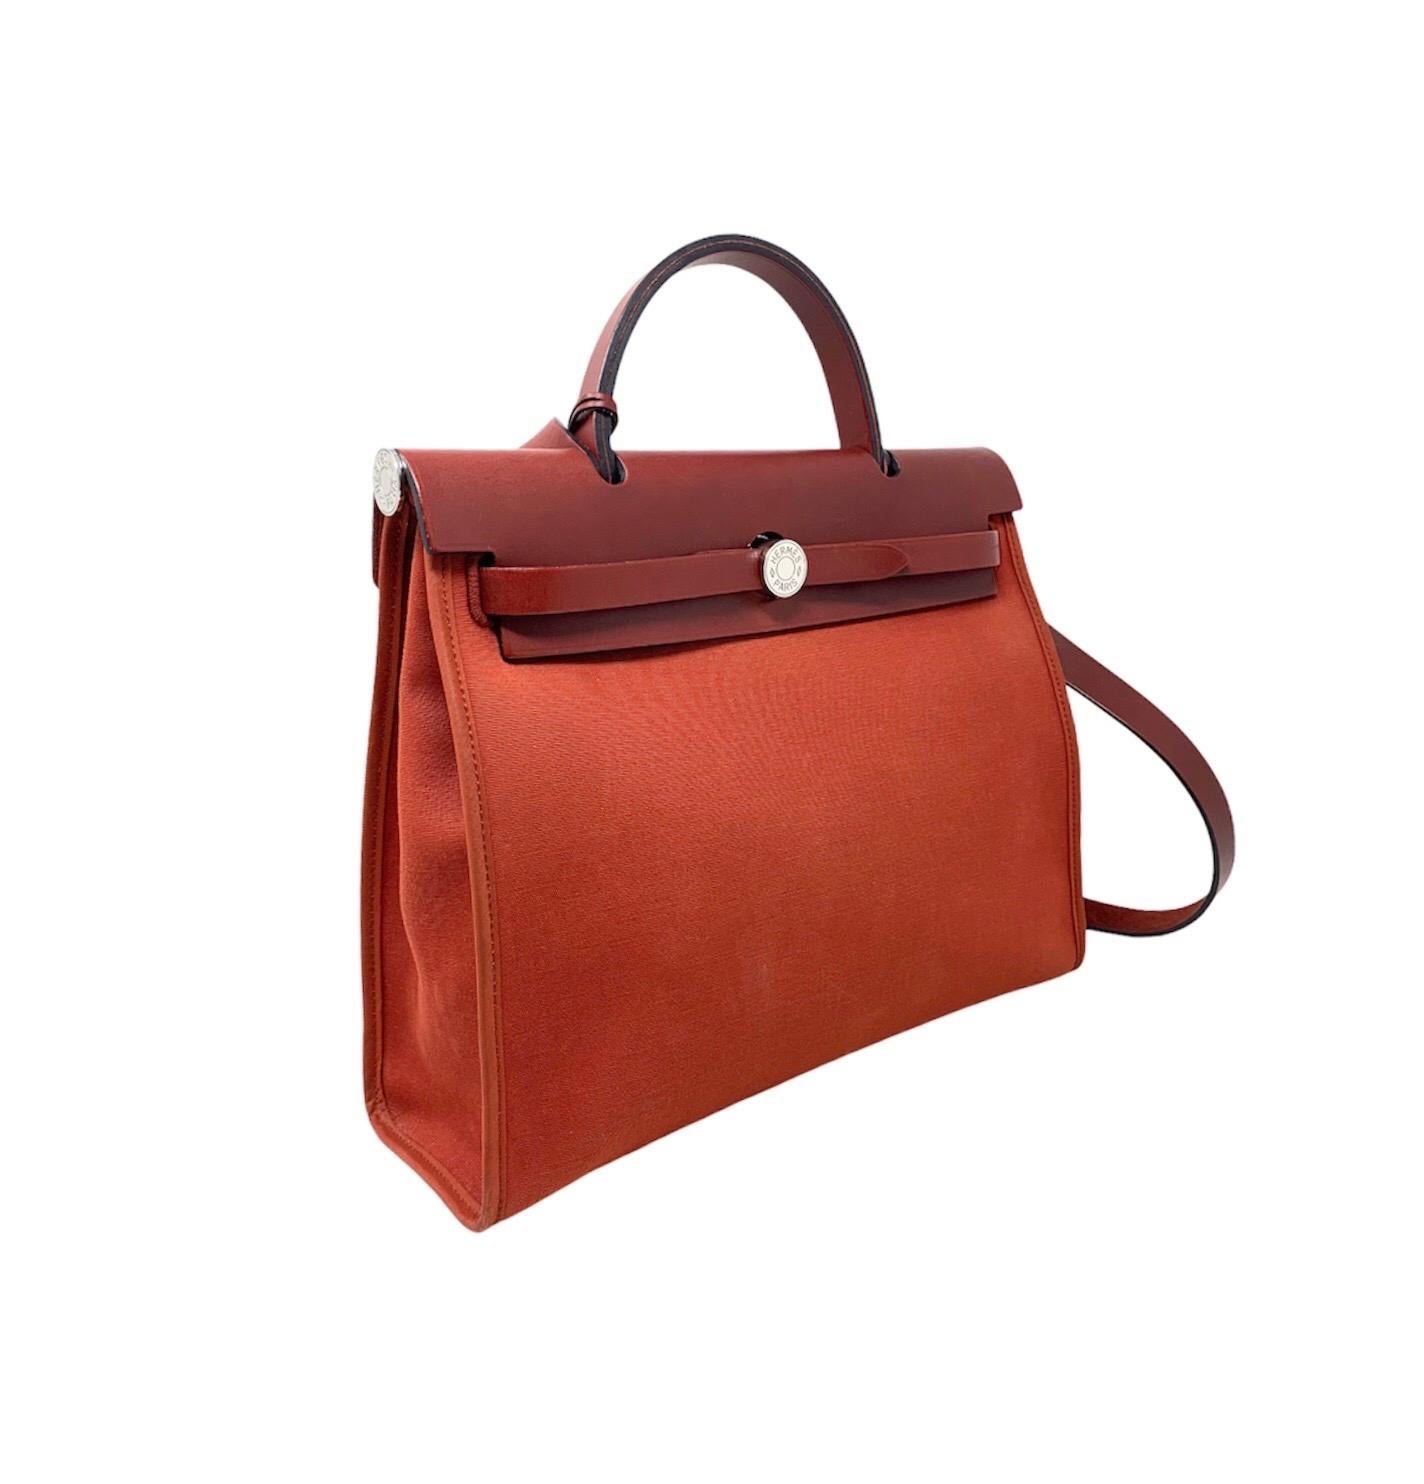 HERMES Sac Her bag 31 In Good Condition For Sale In Milan, IT